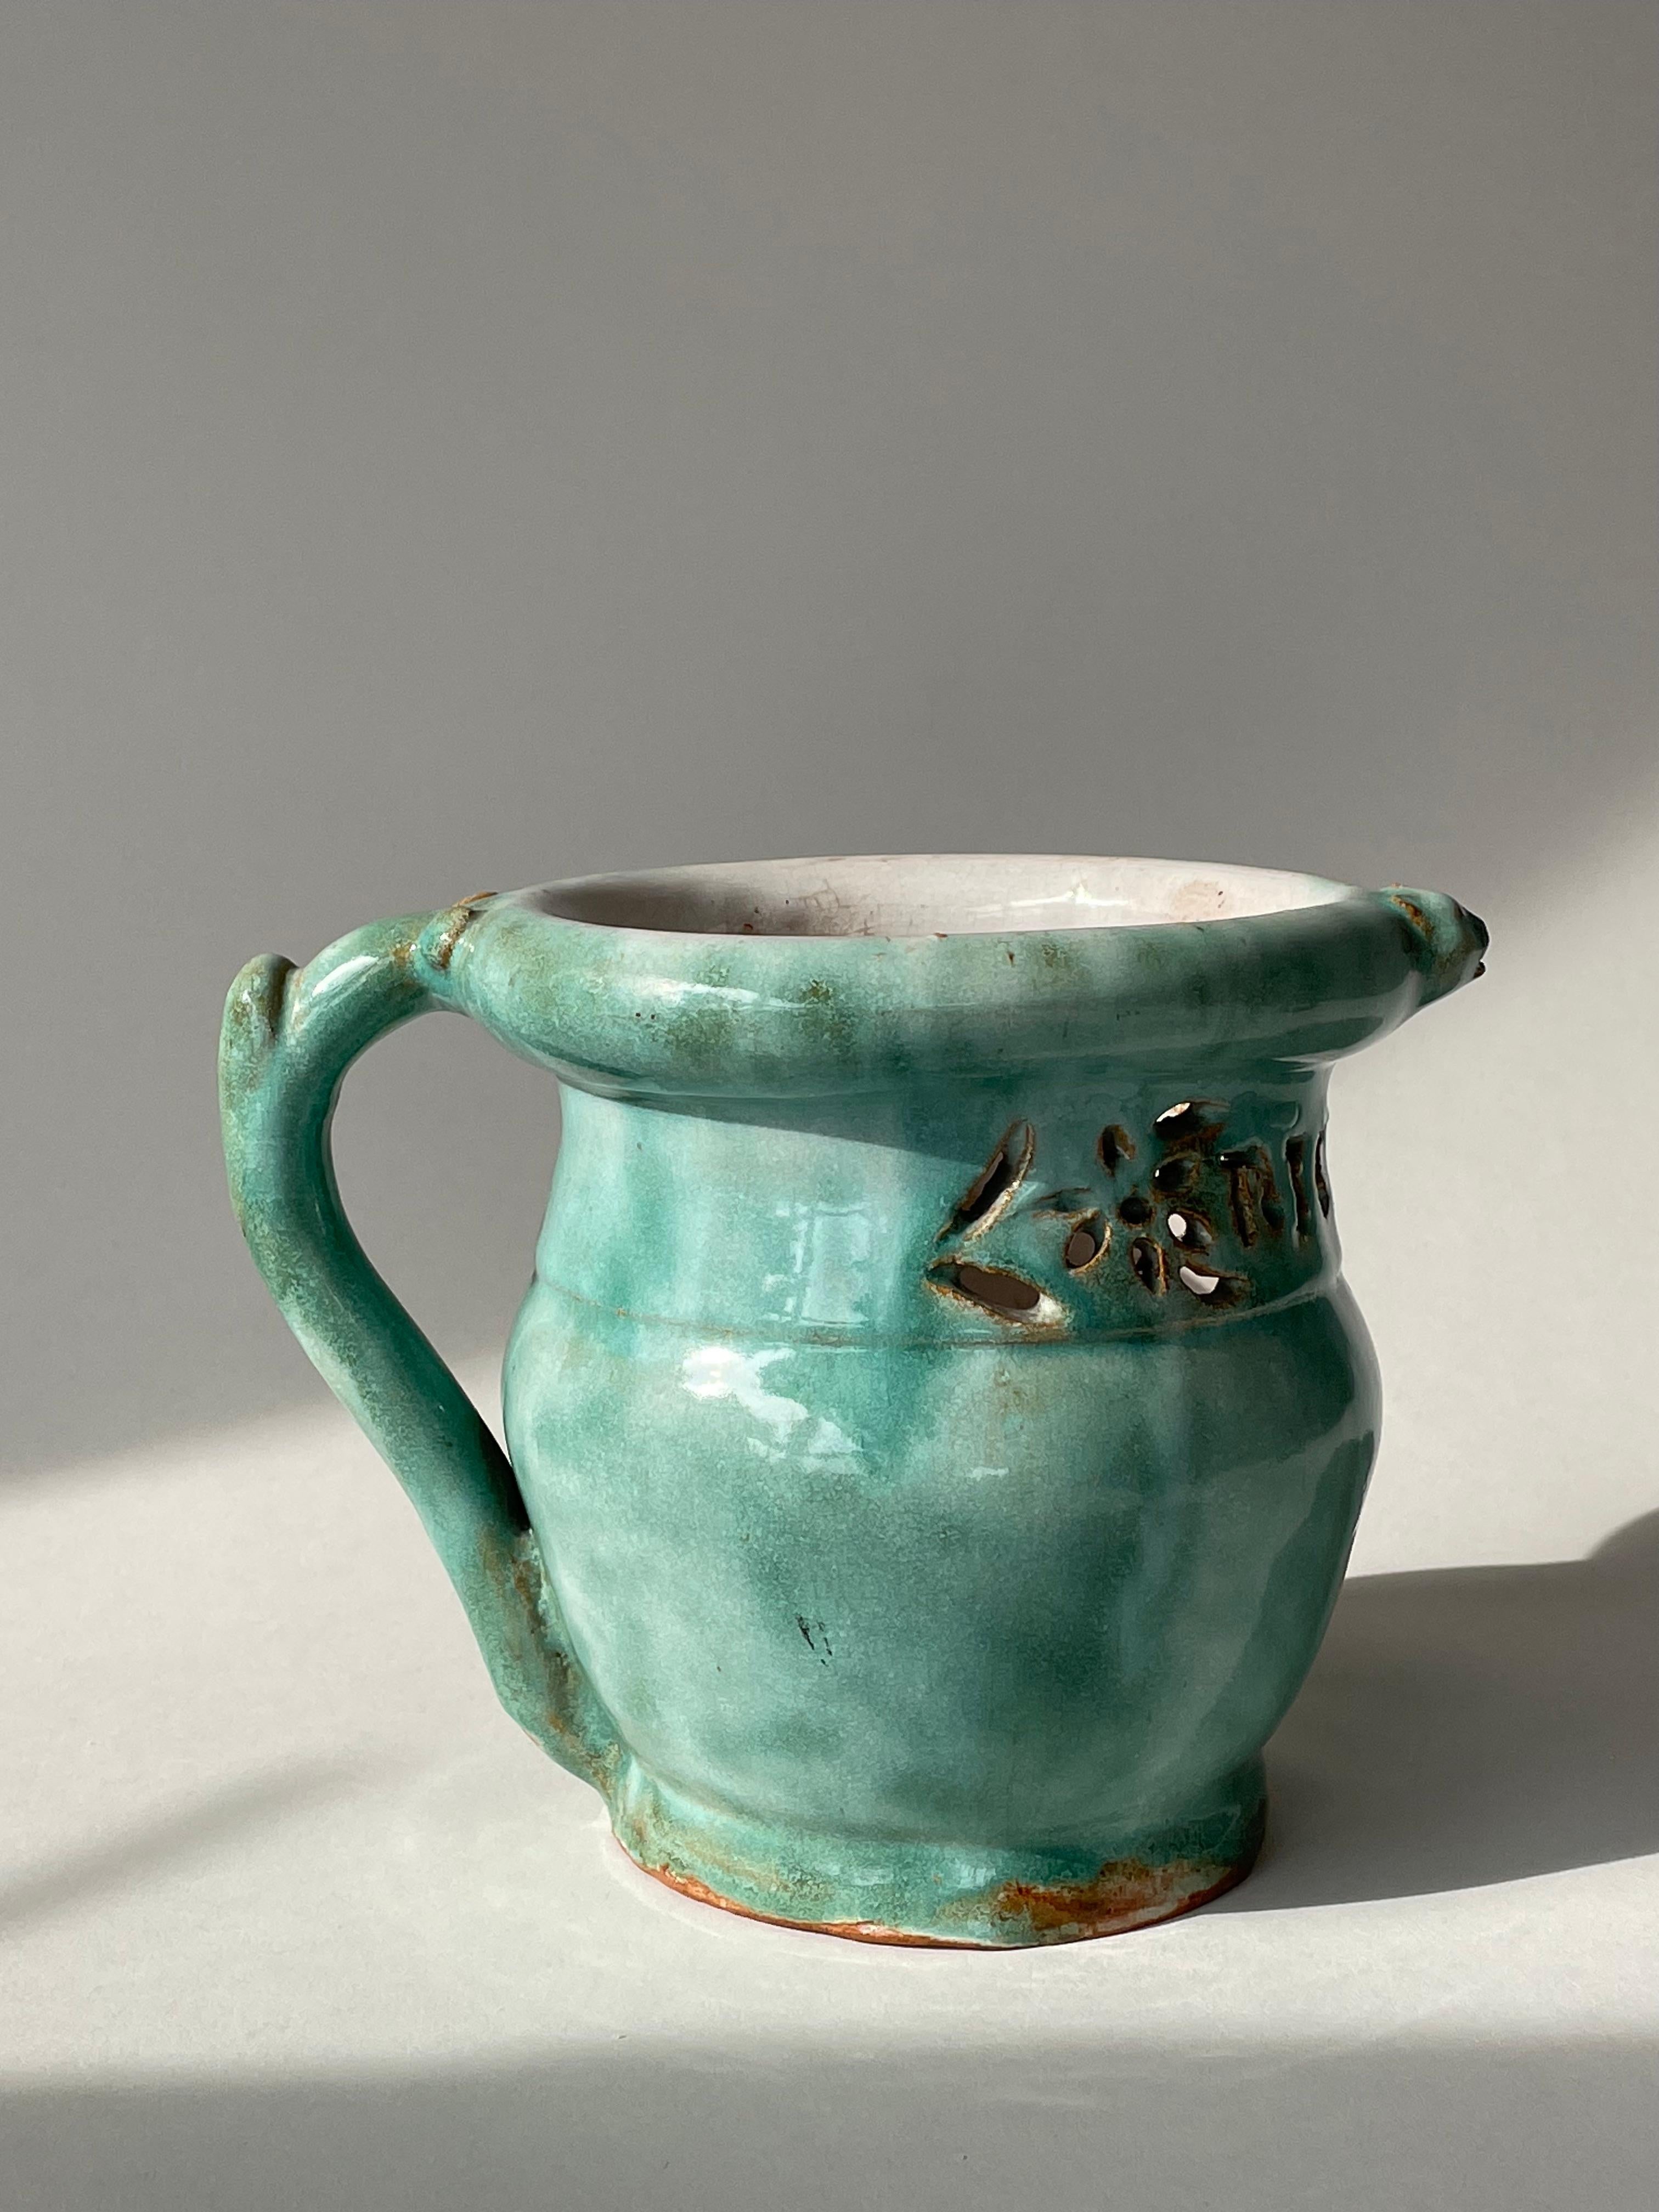 For your consideration is this rare circa 1910 ceramic vase by Enfield Pottery & Tile, attributed to Enfield artist & founder, J.H. Dulles Allen. The light teal glossy glaze shows subtly varied tone and movement across its surface. The interior